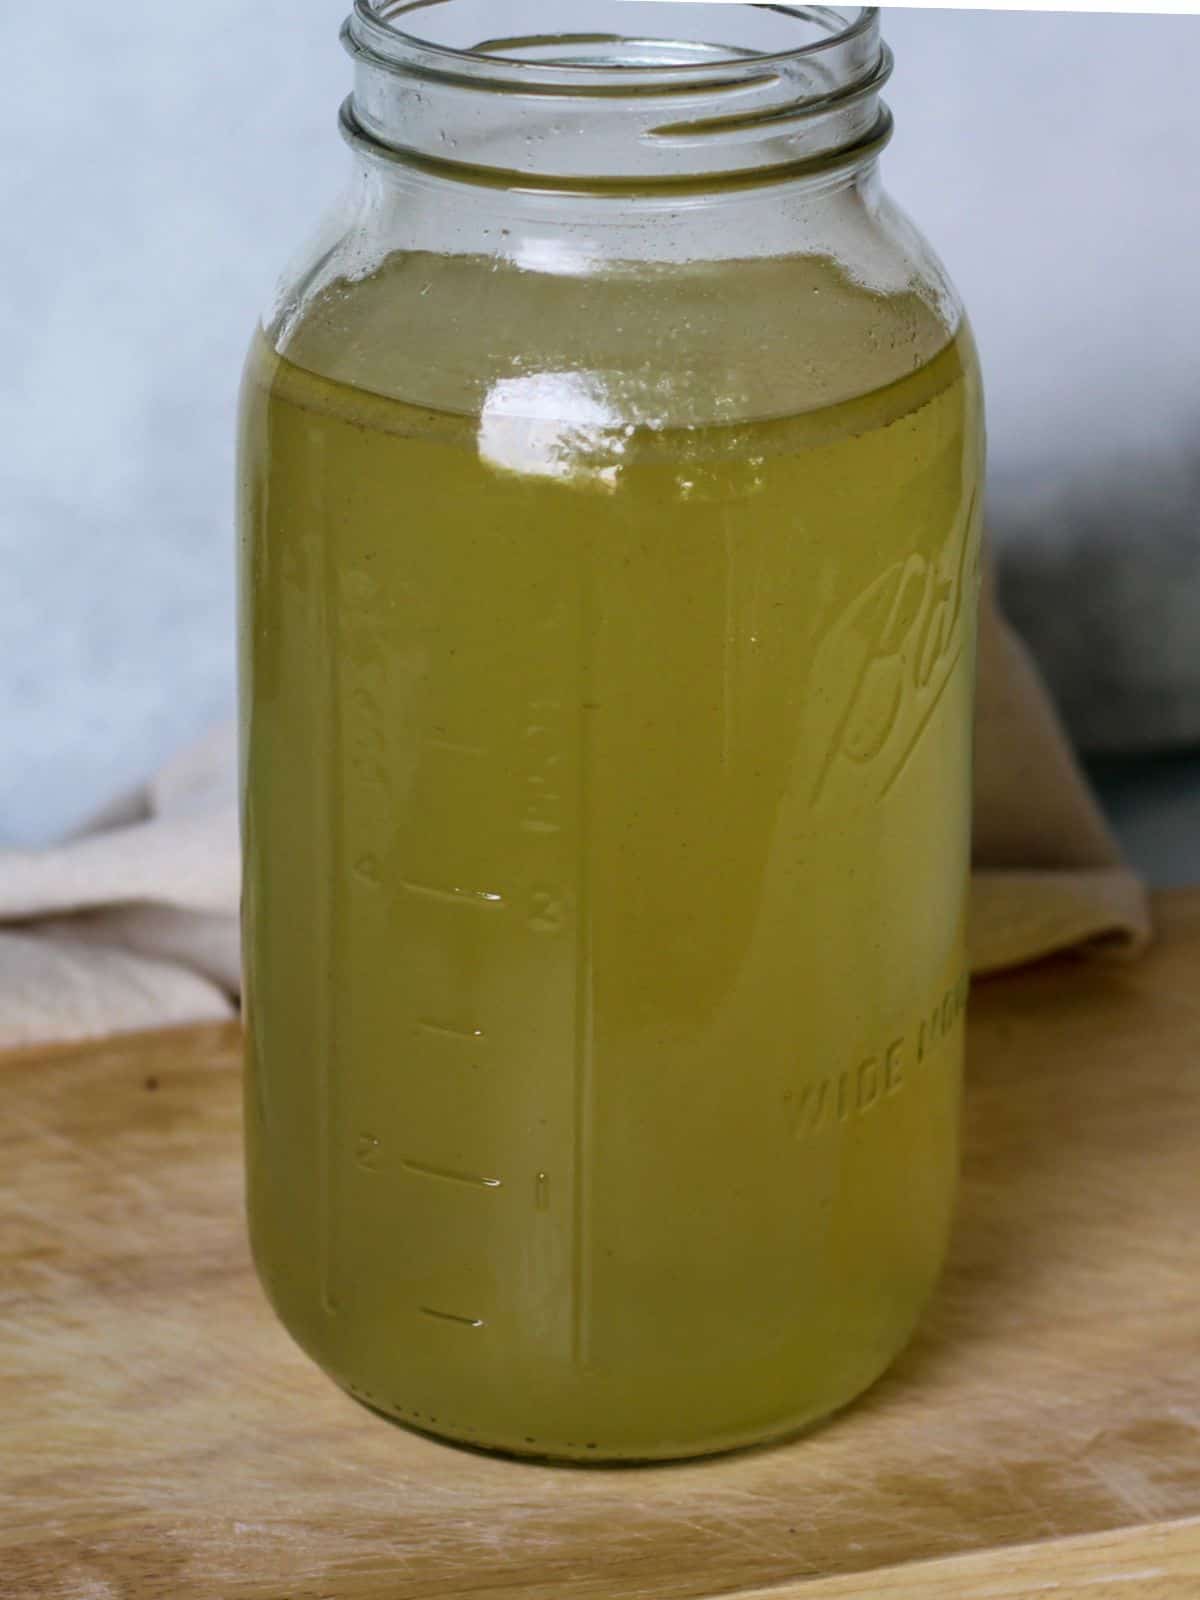 A large glass jar on a wooden cutting board fillied with yellow broth.